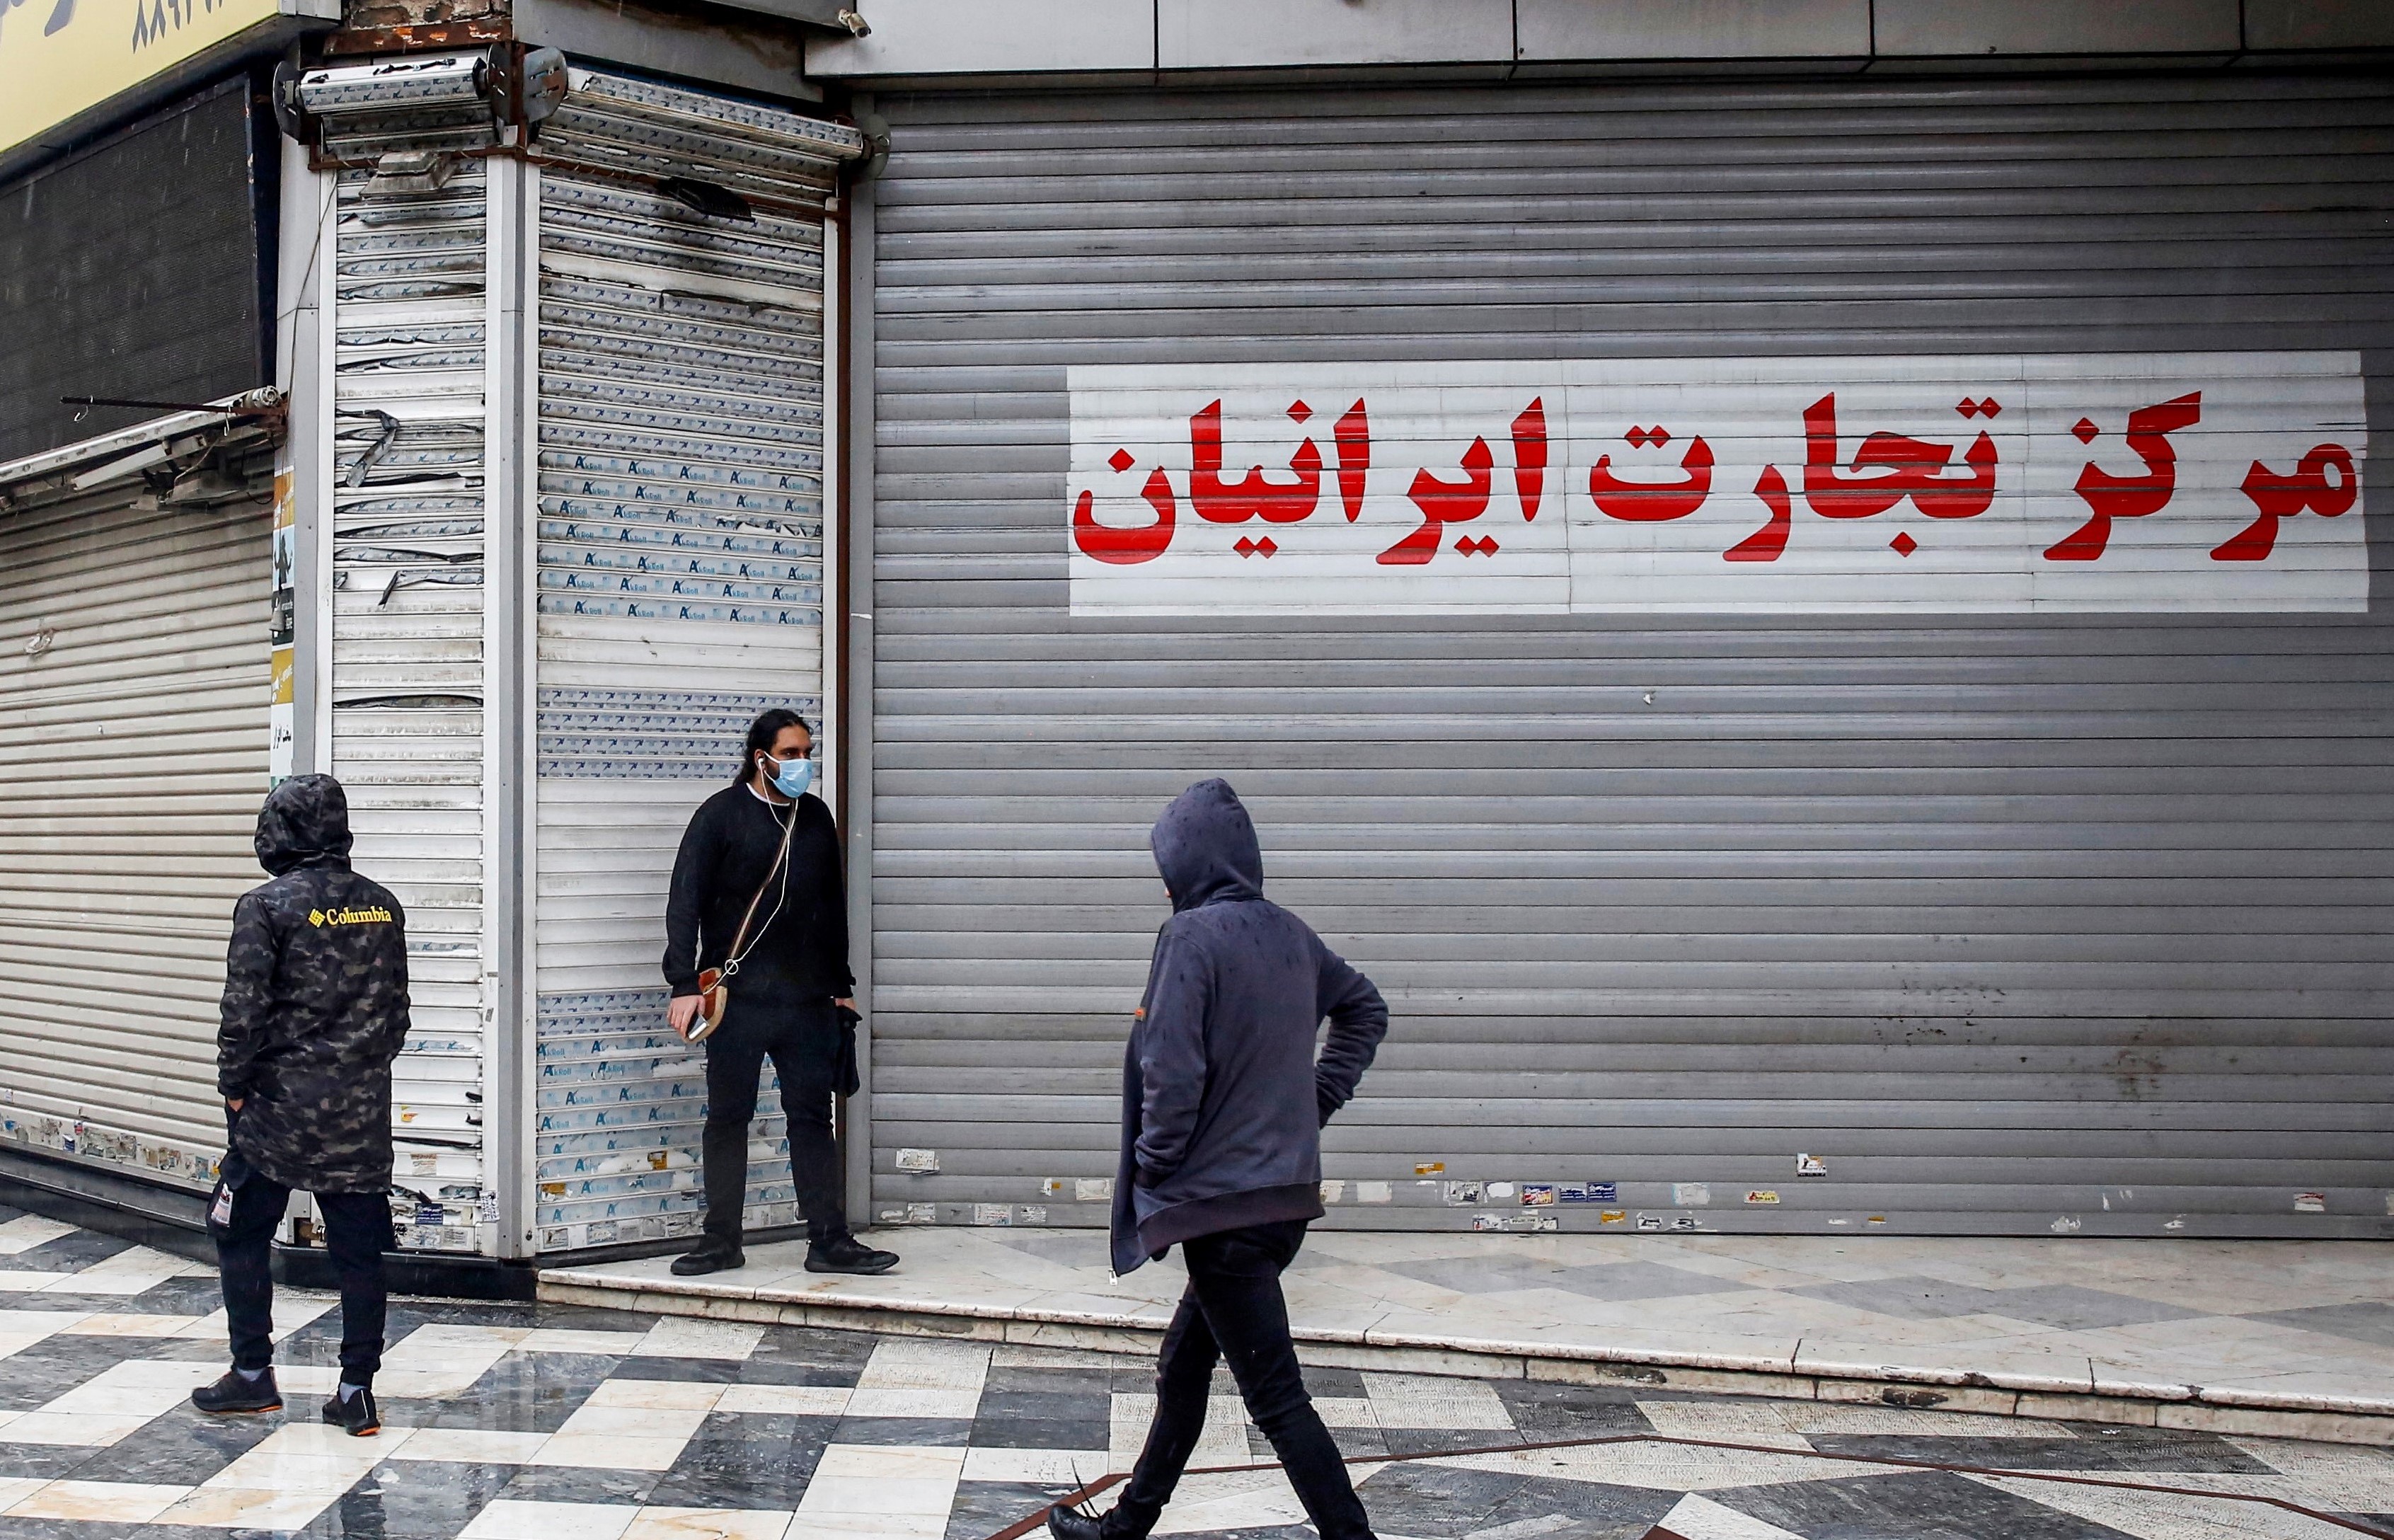 Pedestrians, mask-clad due to the COVID-19 coronavirus pandemic, walk past closed shops along a street in Iran's capital Tehran on November 21, 2020,